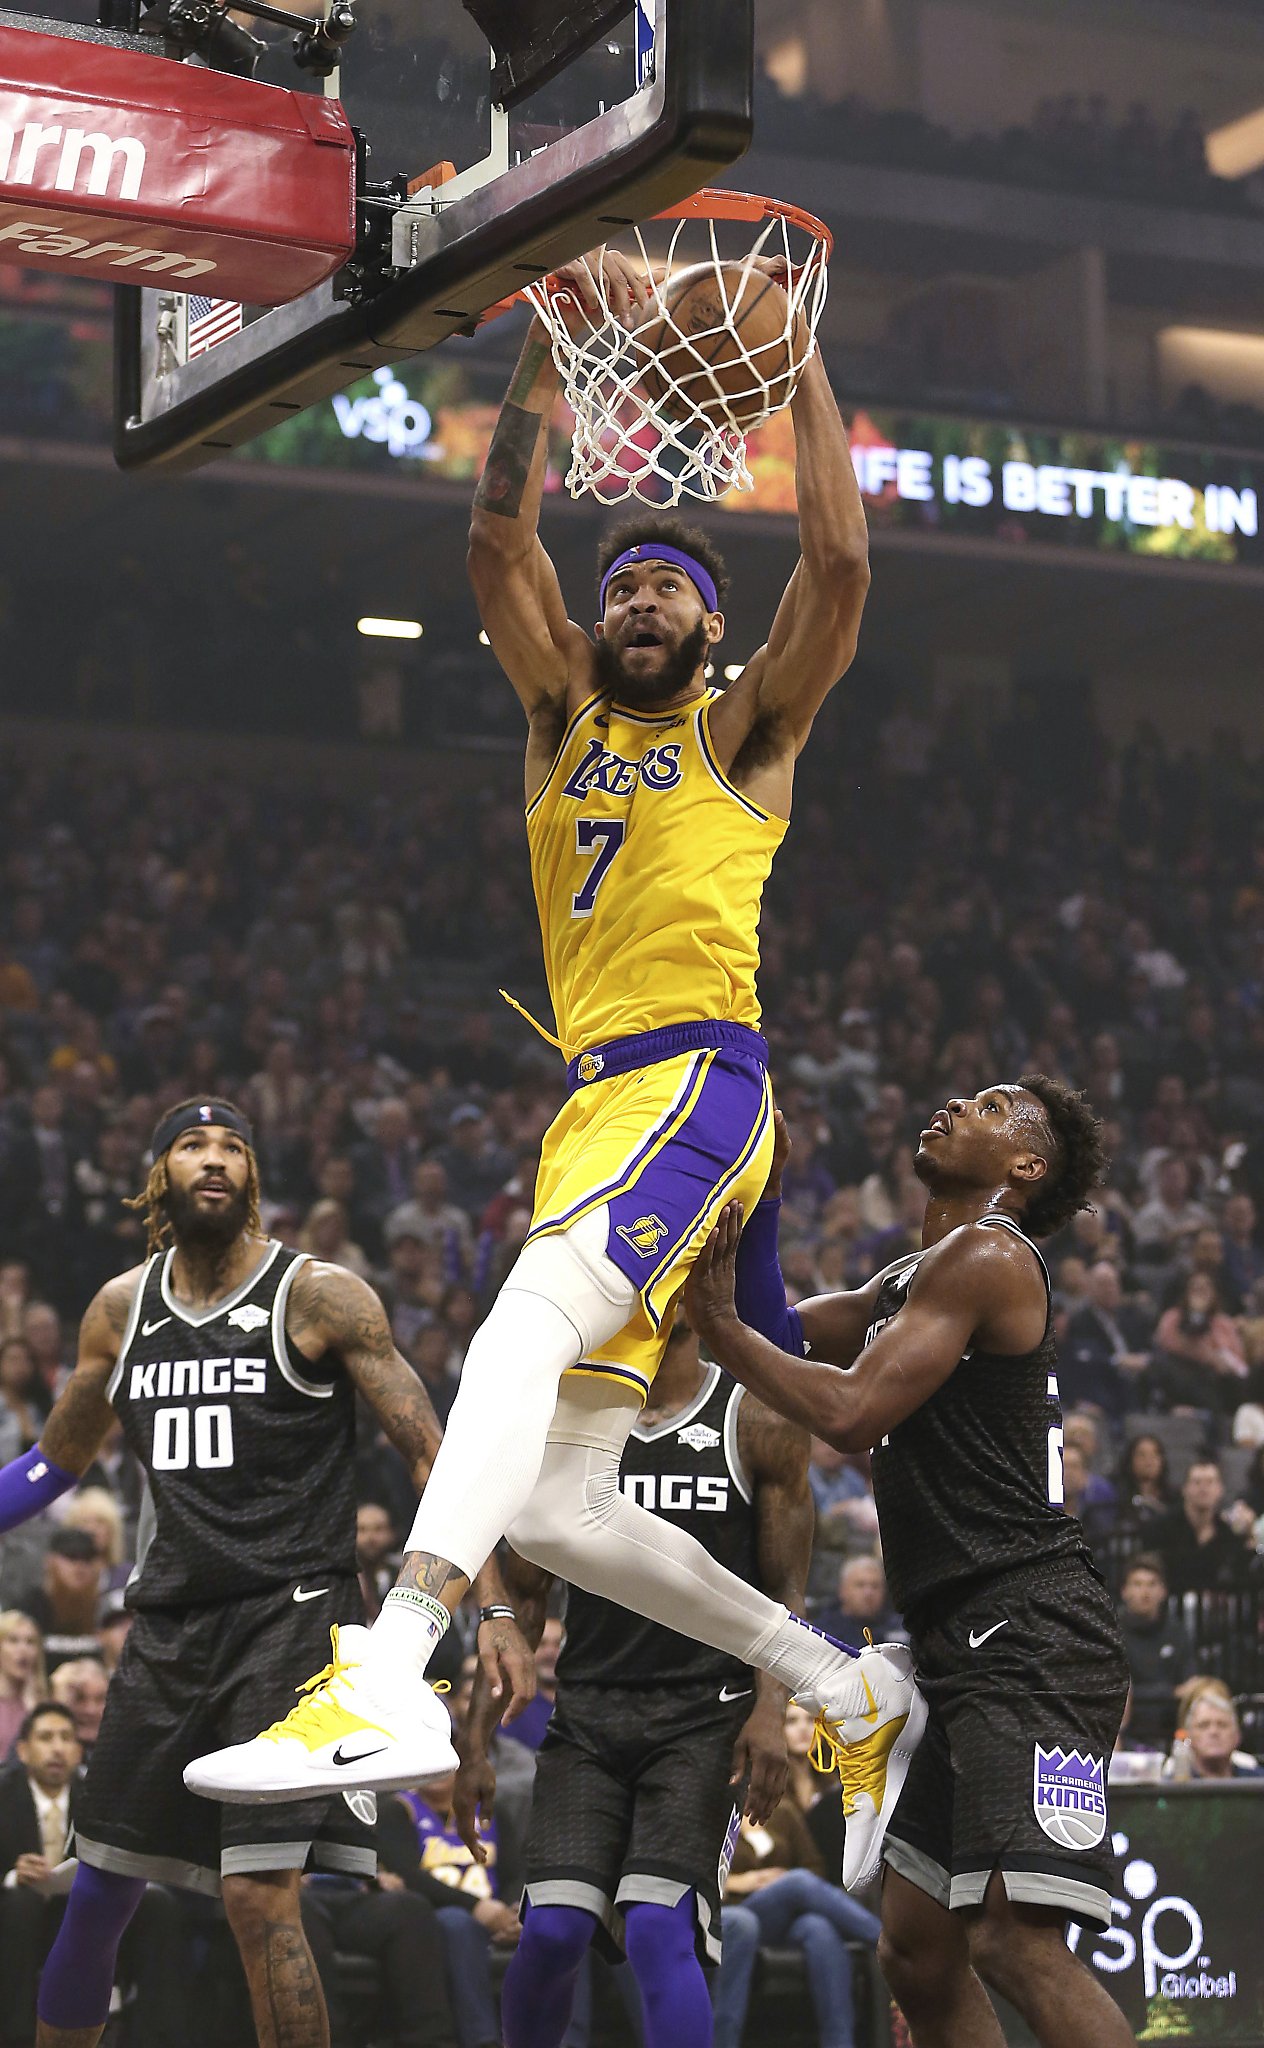 JaVale McGee falls victim to nutmeg in appropriate start to new